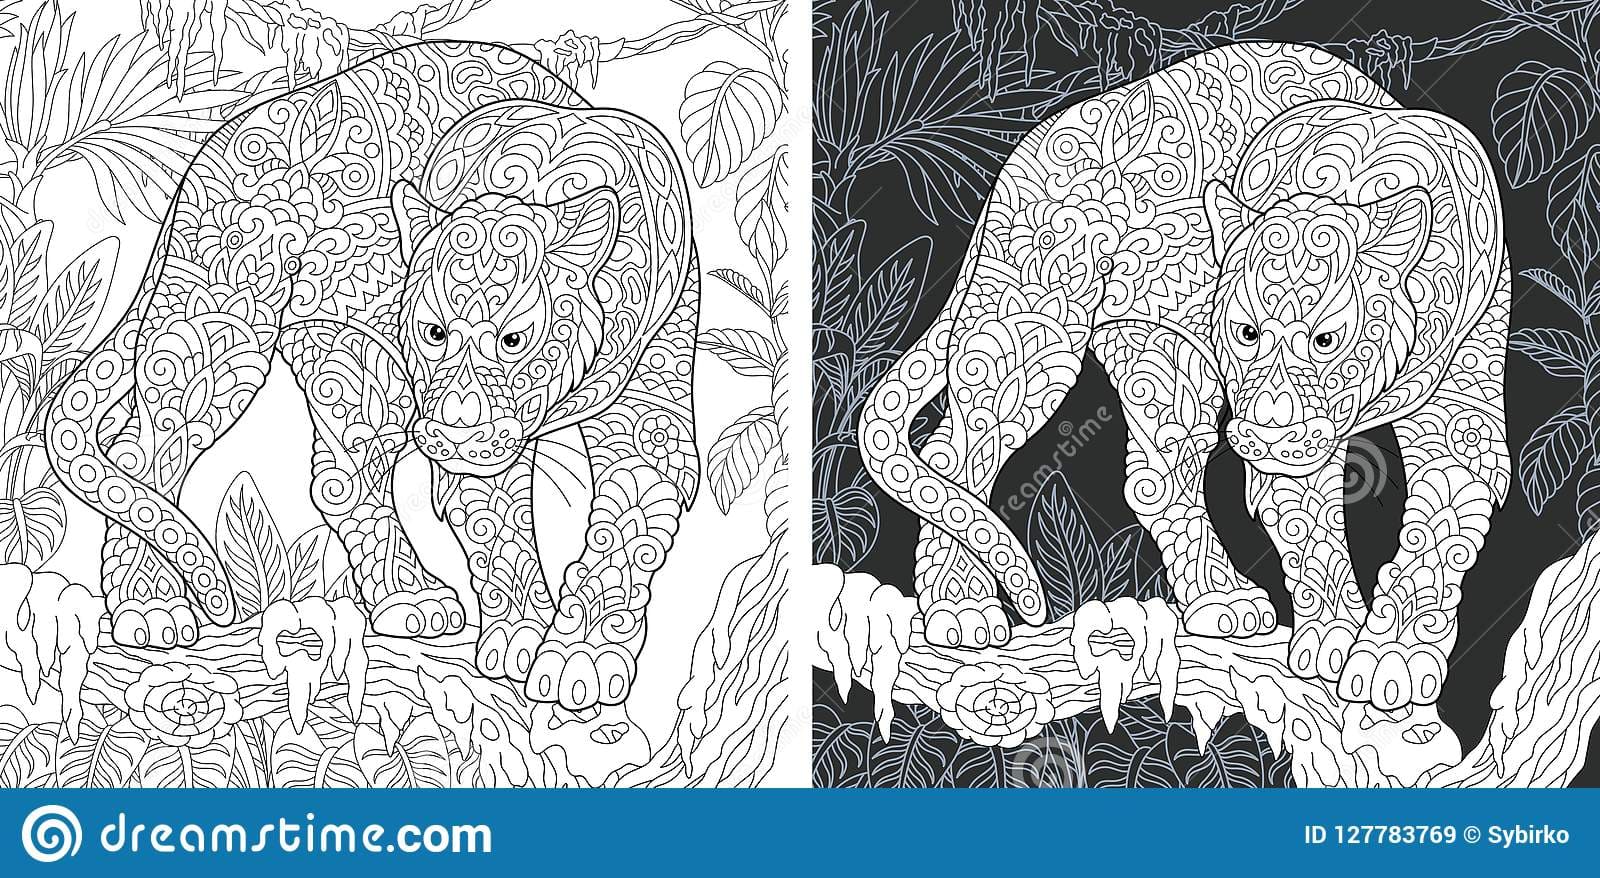 Panther Image Cute Coloring Page